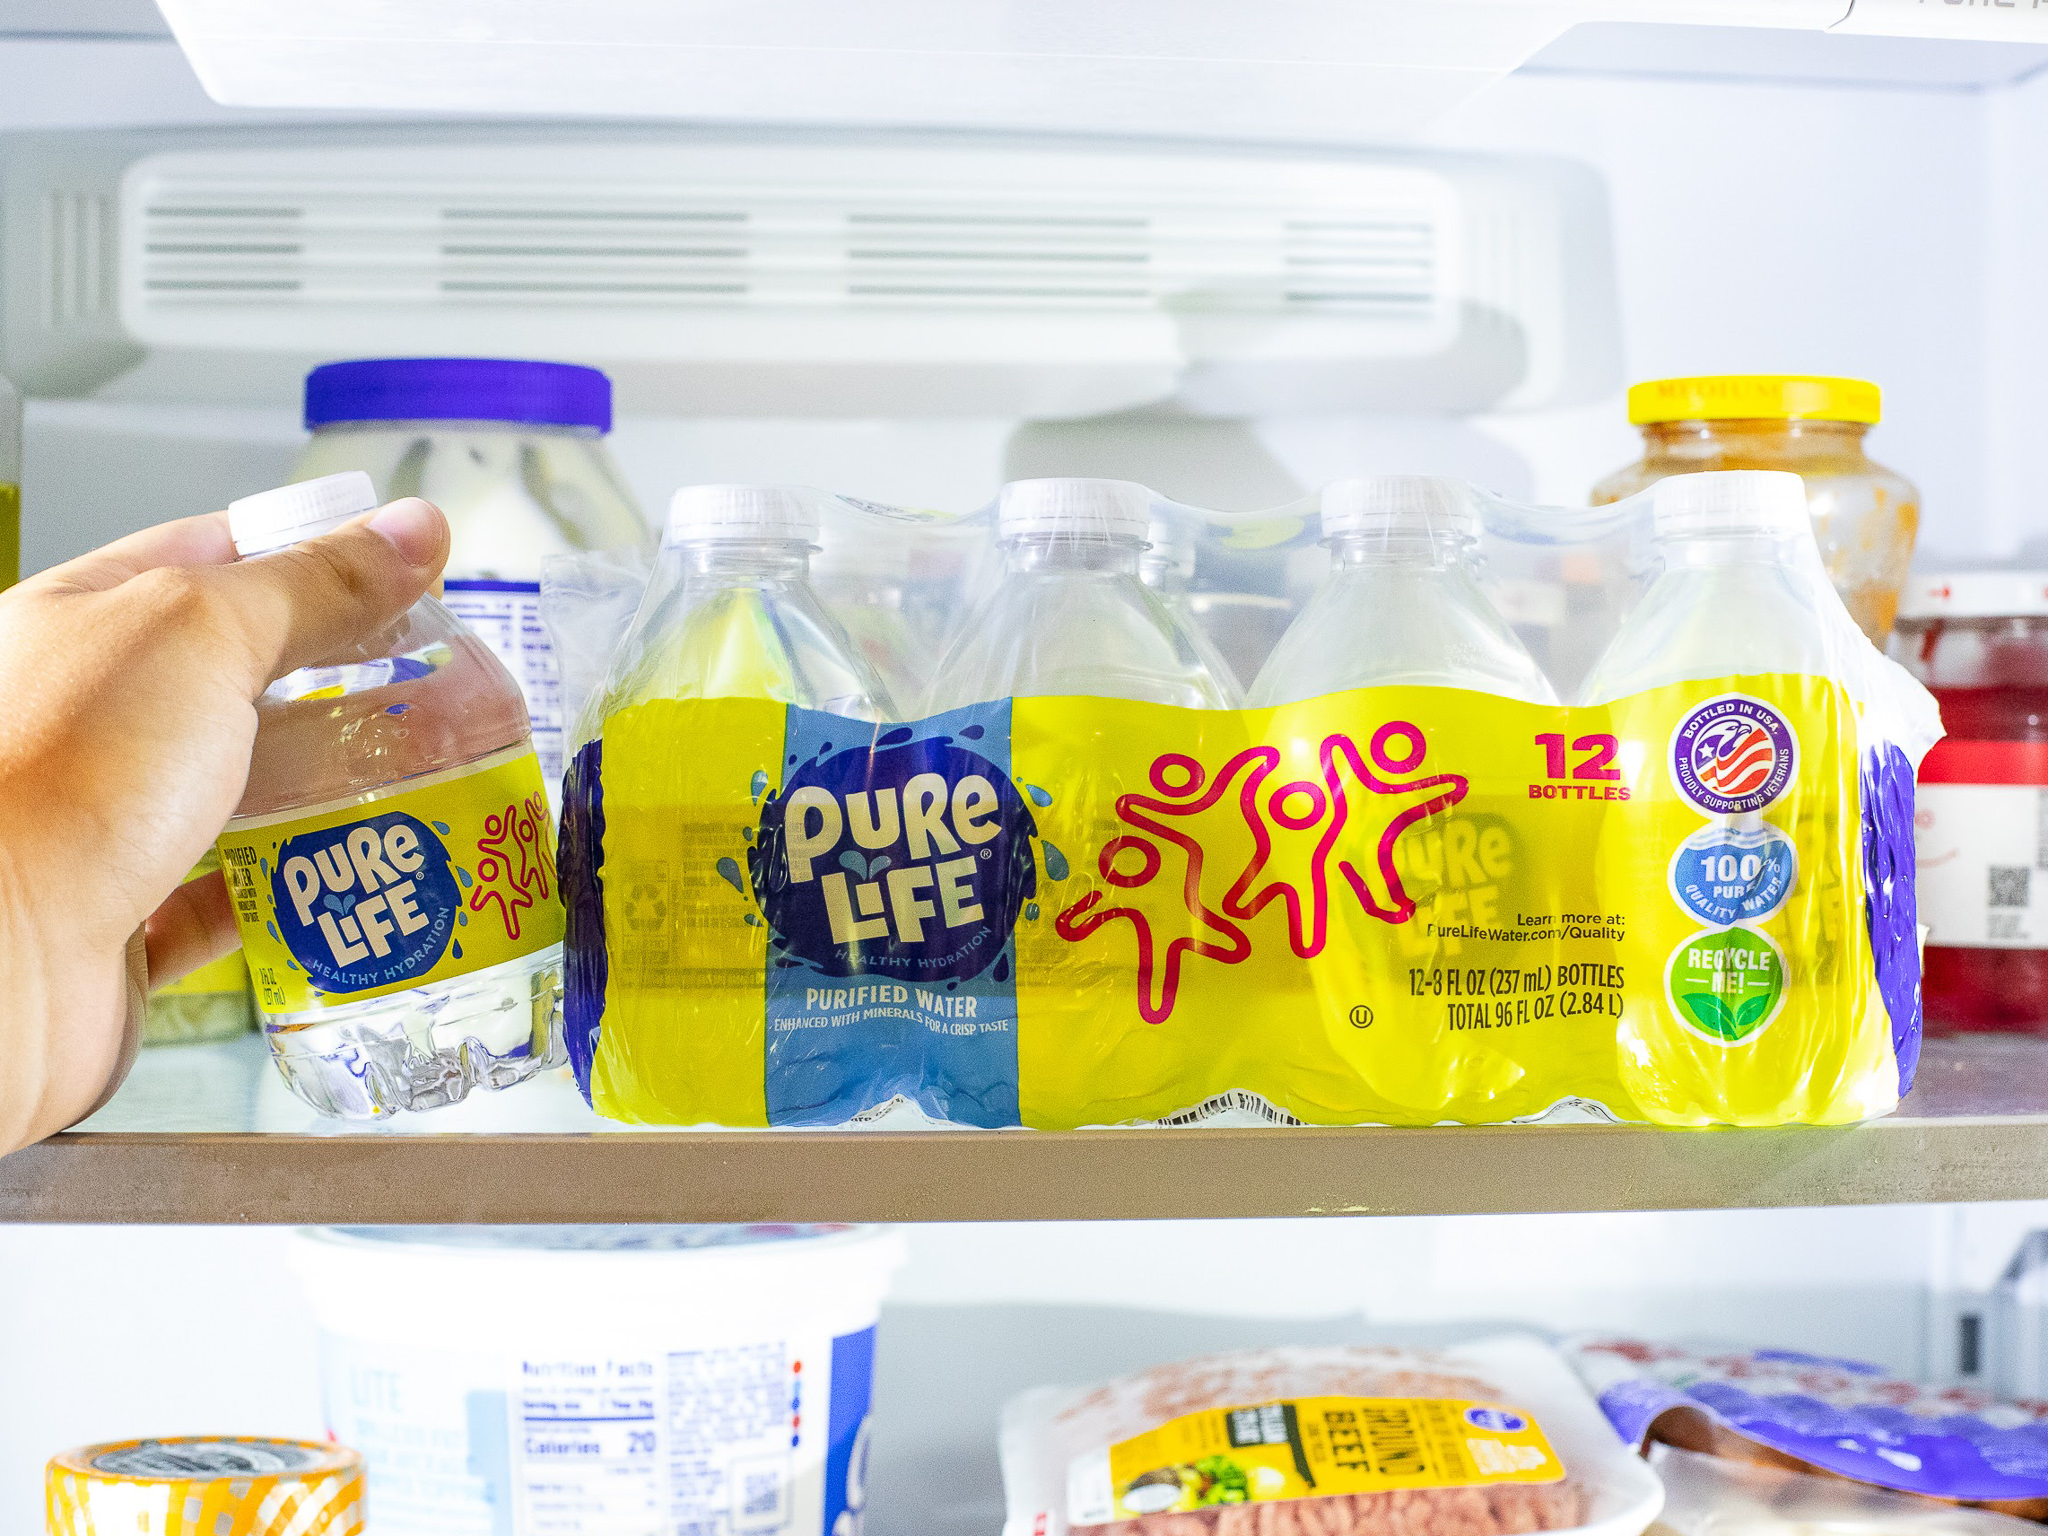 Pure Life Purified Water 12-Pack Just $2.29 At Kroger